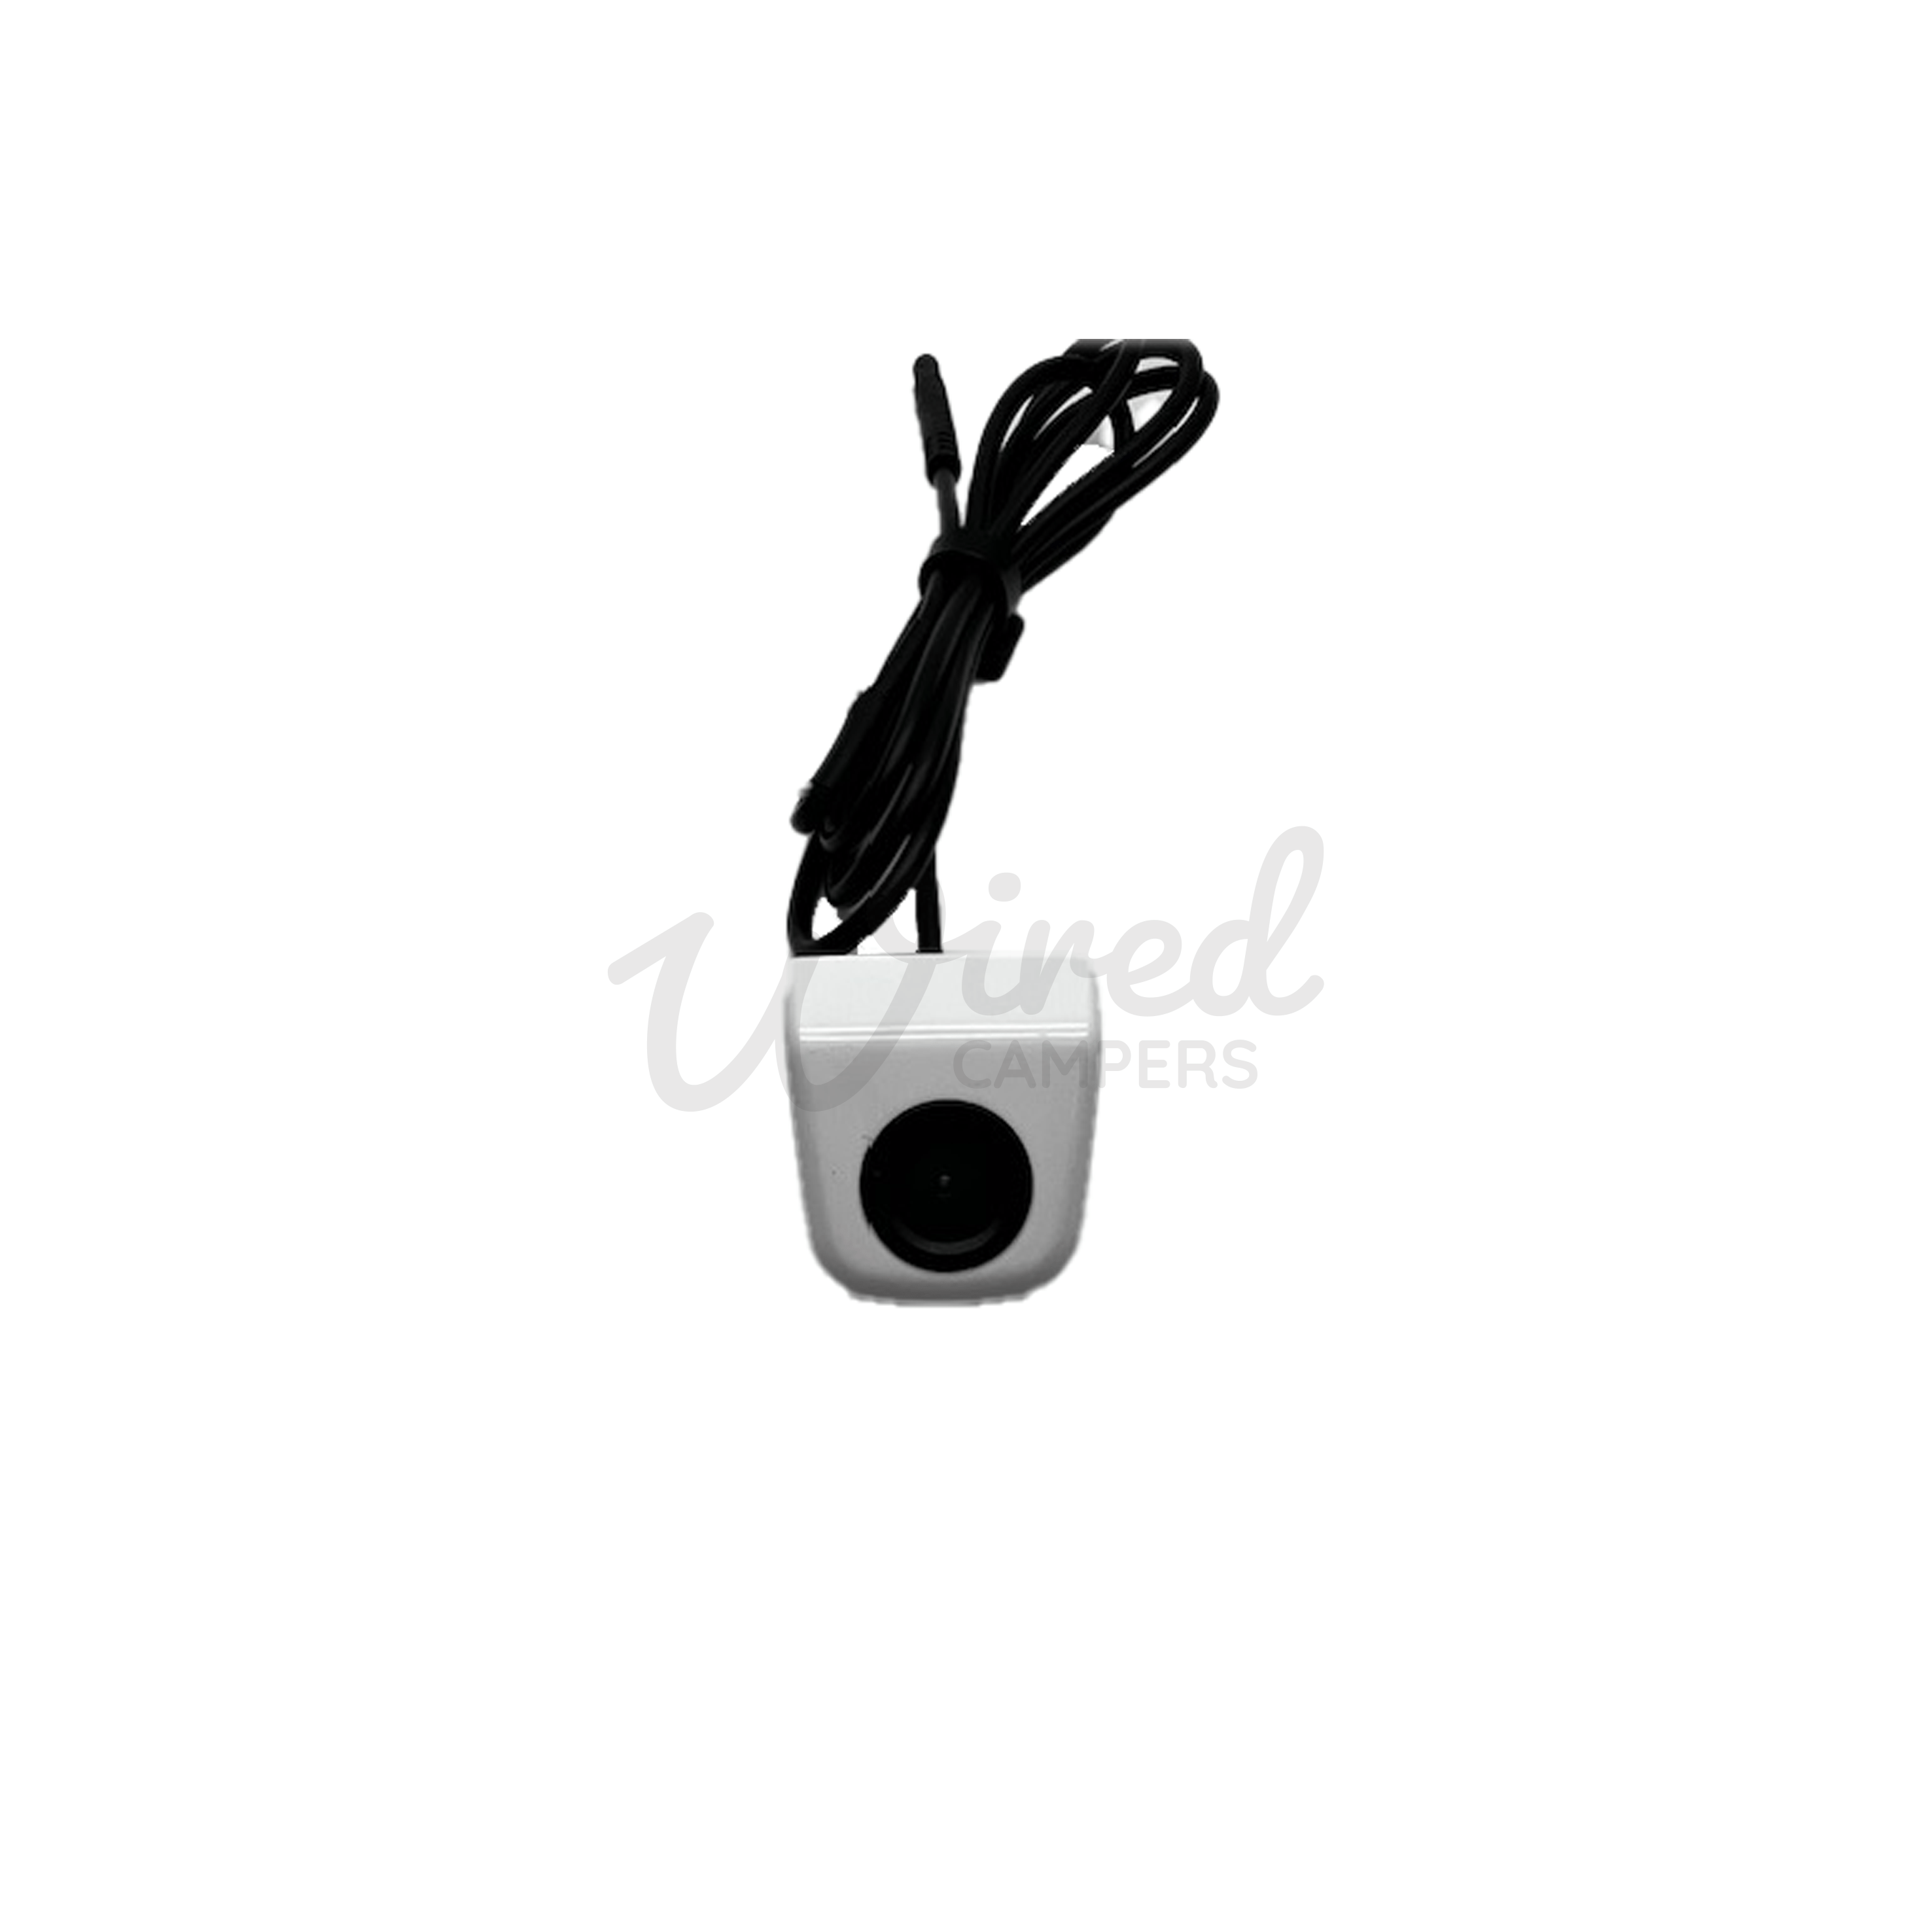 Wired Campers Limited Bolt In Universal Camper / Caravan Rear Reversing Parking Camera - White